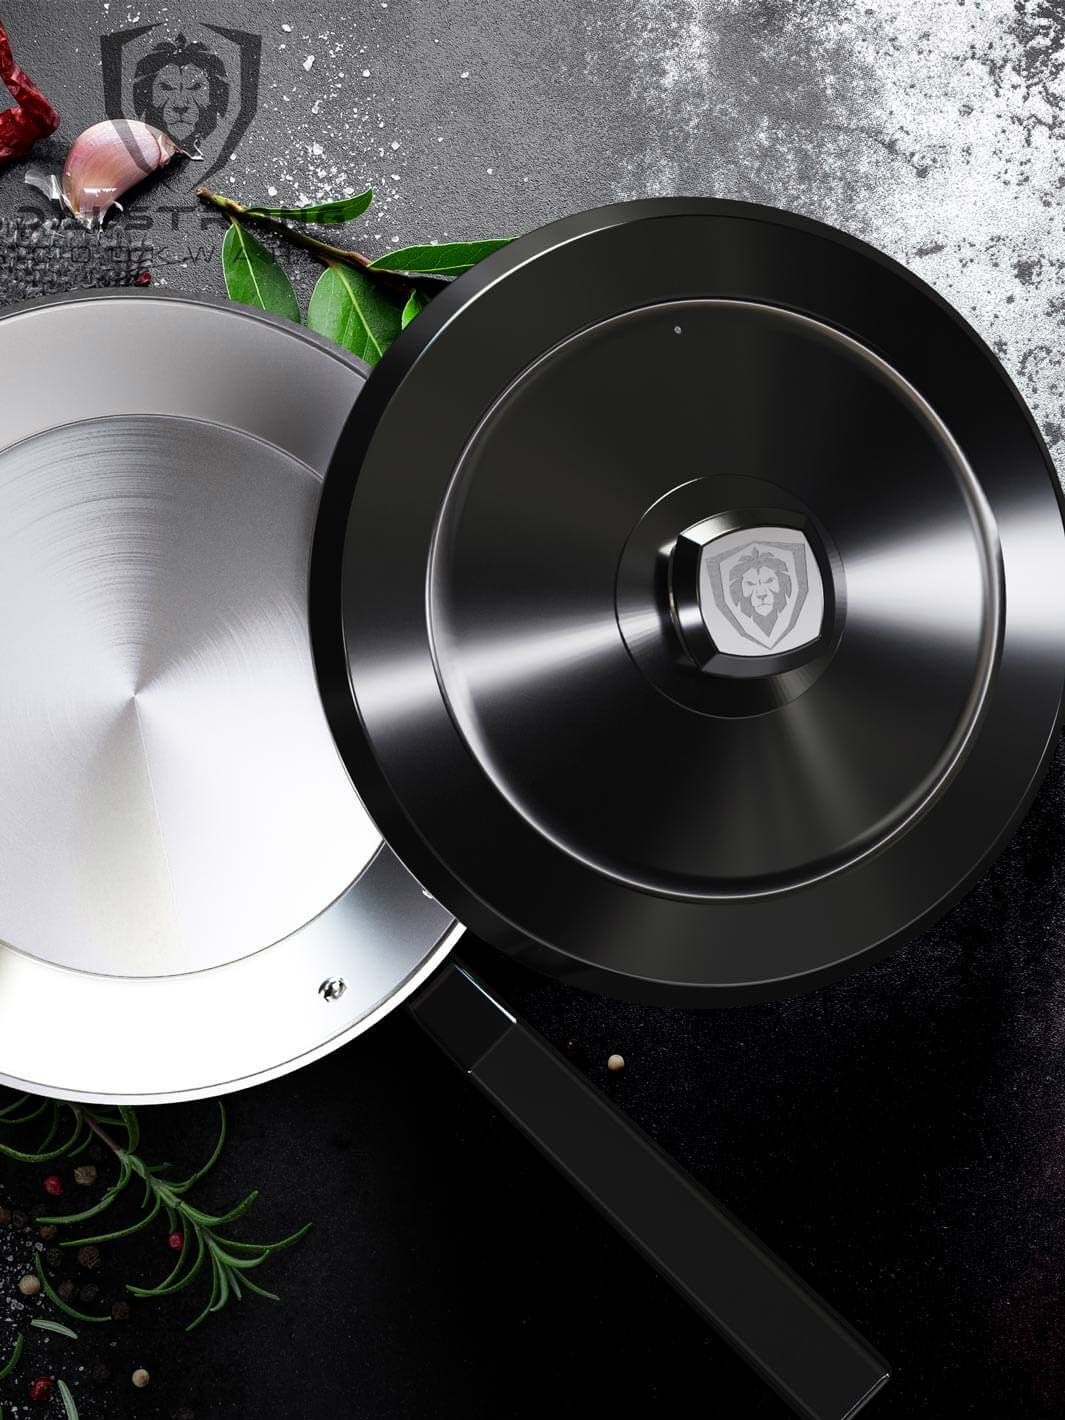 10" Frying Pan & Skillet | Hammered Finish Black | Avalon Series | Dalstrong ©